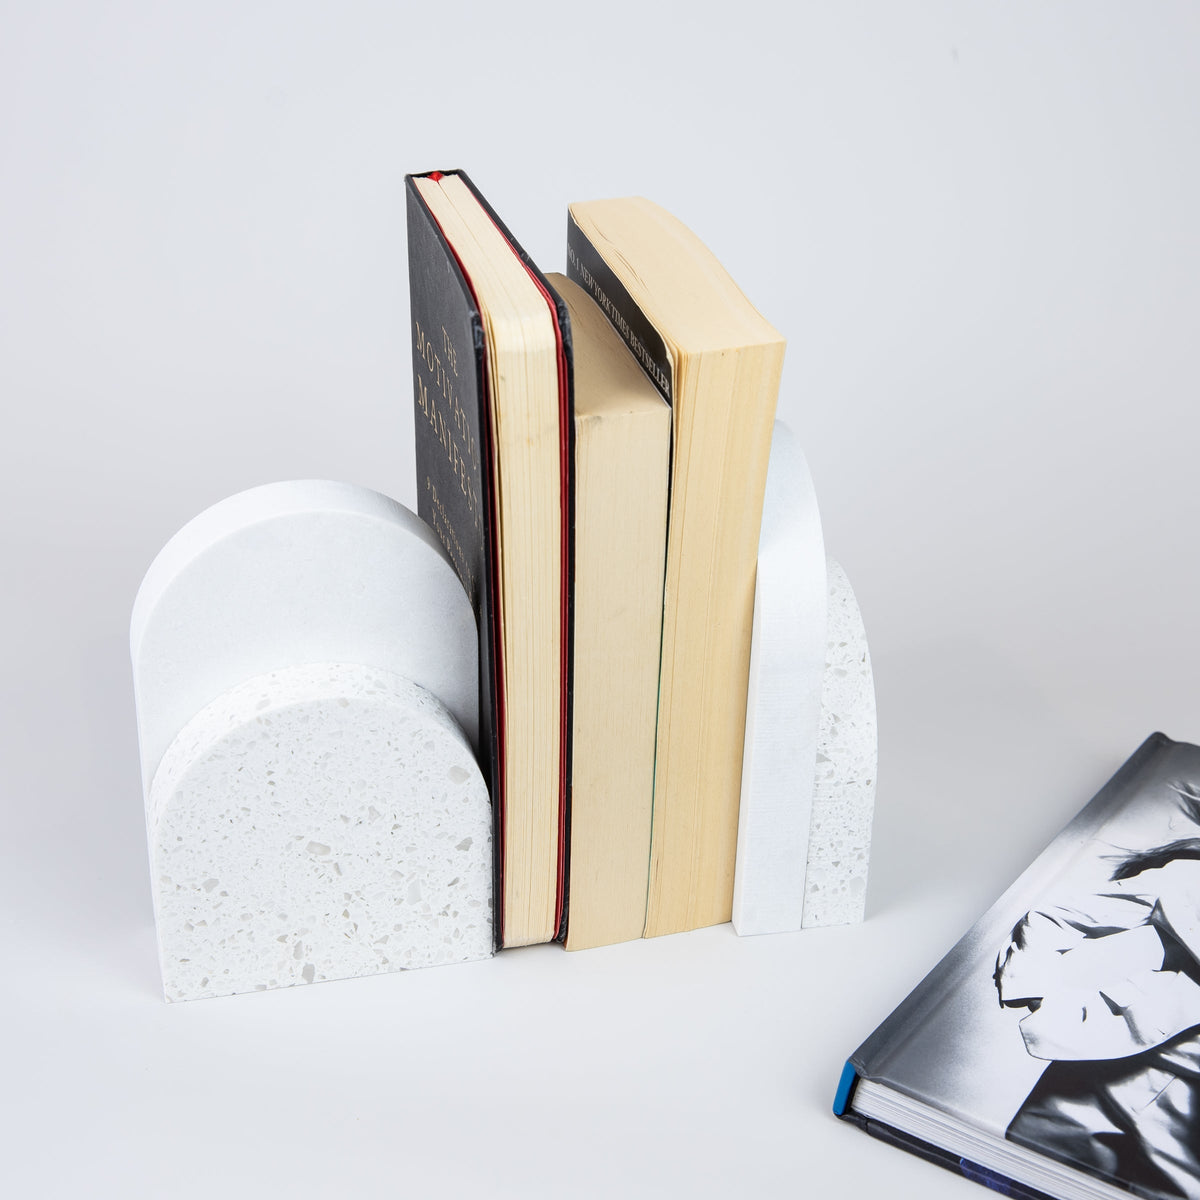 Quartz Bookend Set is 4cm thick. Styled with books. Available in Nougat partnered with Organic White by Caesarstone with chunky coarse-grained textures and neutral-coloured mineral chips, meets a clean white surface with subtly blended undertones, reflecting a natural appearance that is effortlessly chic. The perfect addition to your home decor, similar to marble bookends.